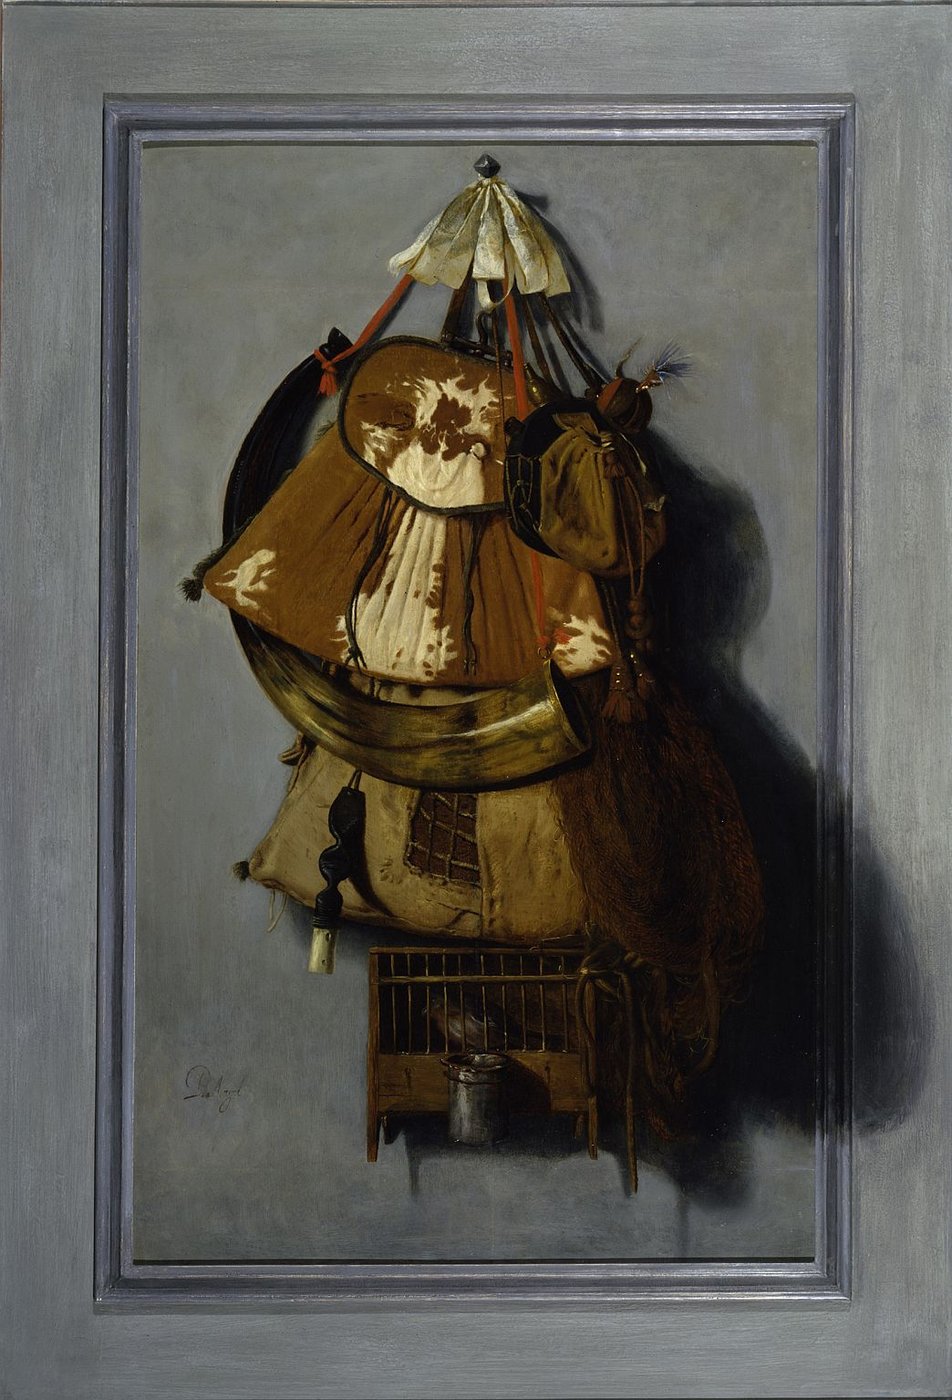 Philips Angel van Middelburg, Still Life with Hunting Equipment, oil on canvas © The Paintings Gallery of the Academy of Fine Arts Vienna